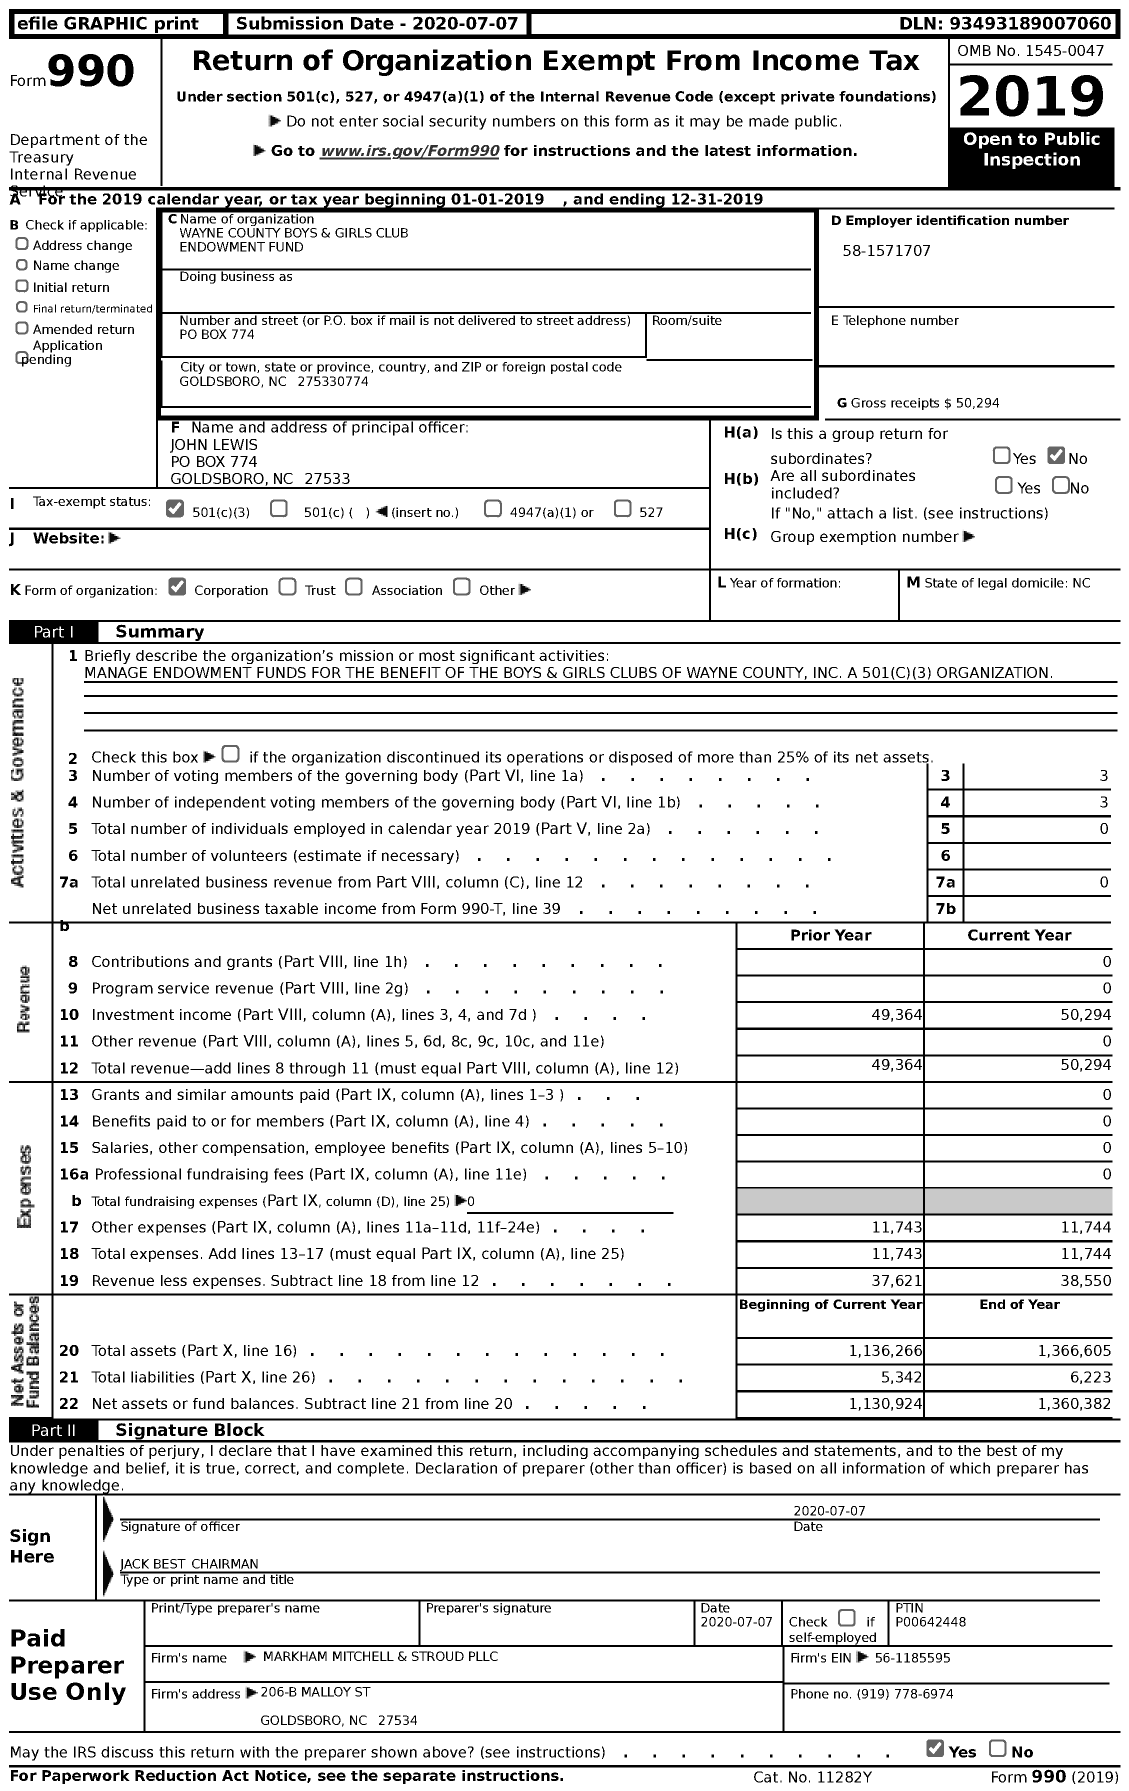 Image of first page of 2019 Form 990 for Wayne County Boys and Girls Club Endowment Fund